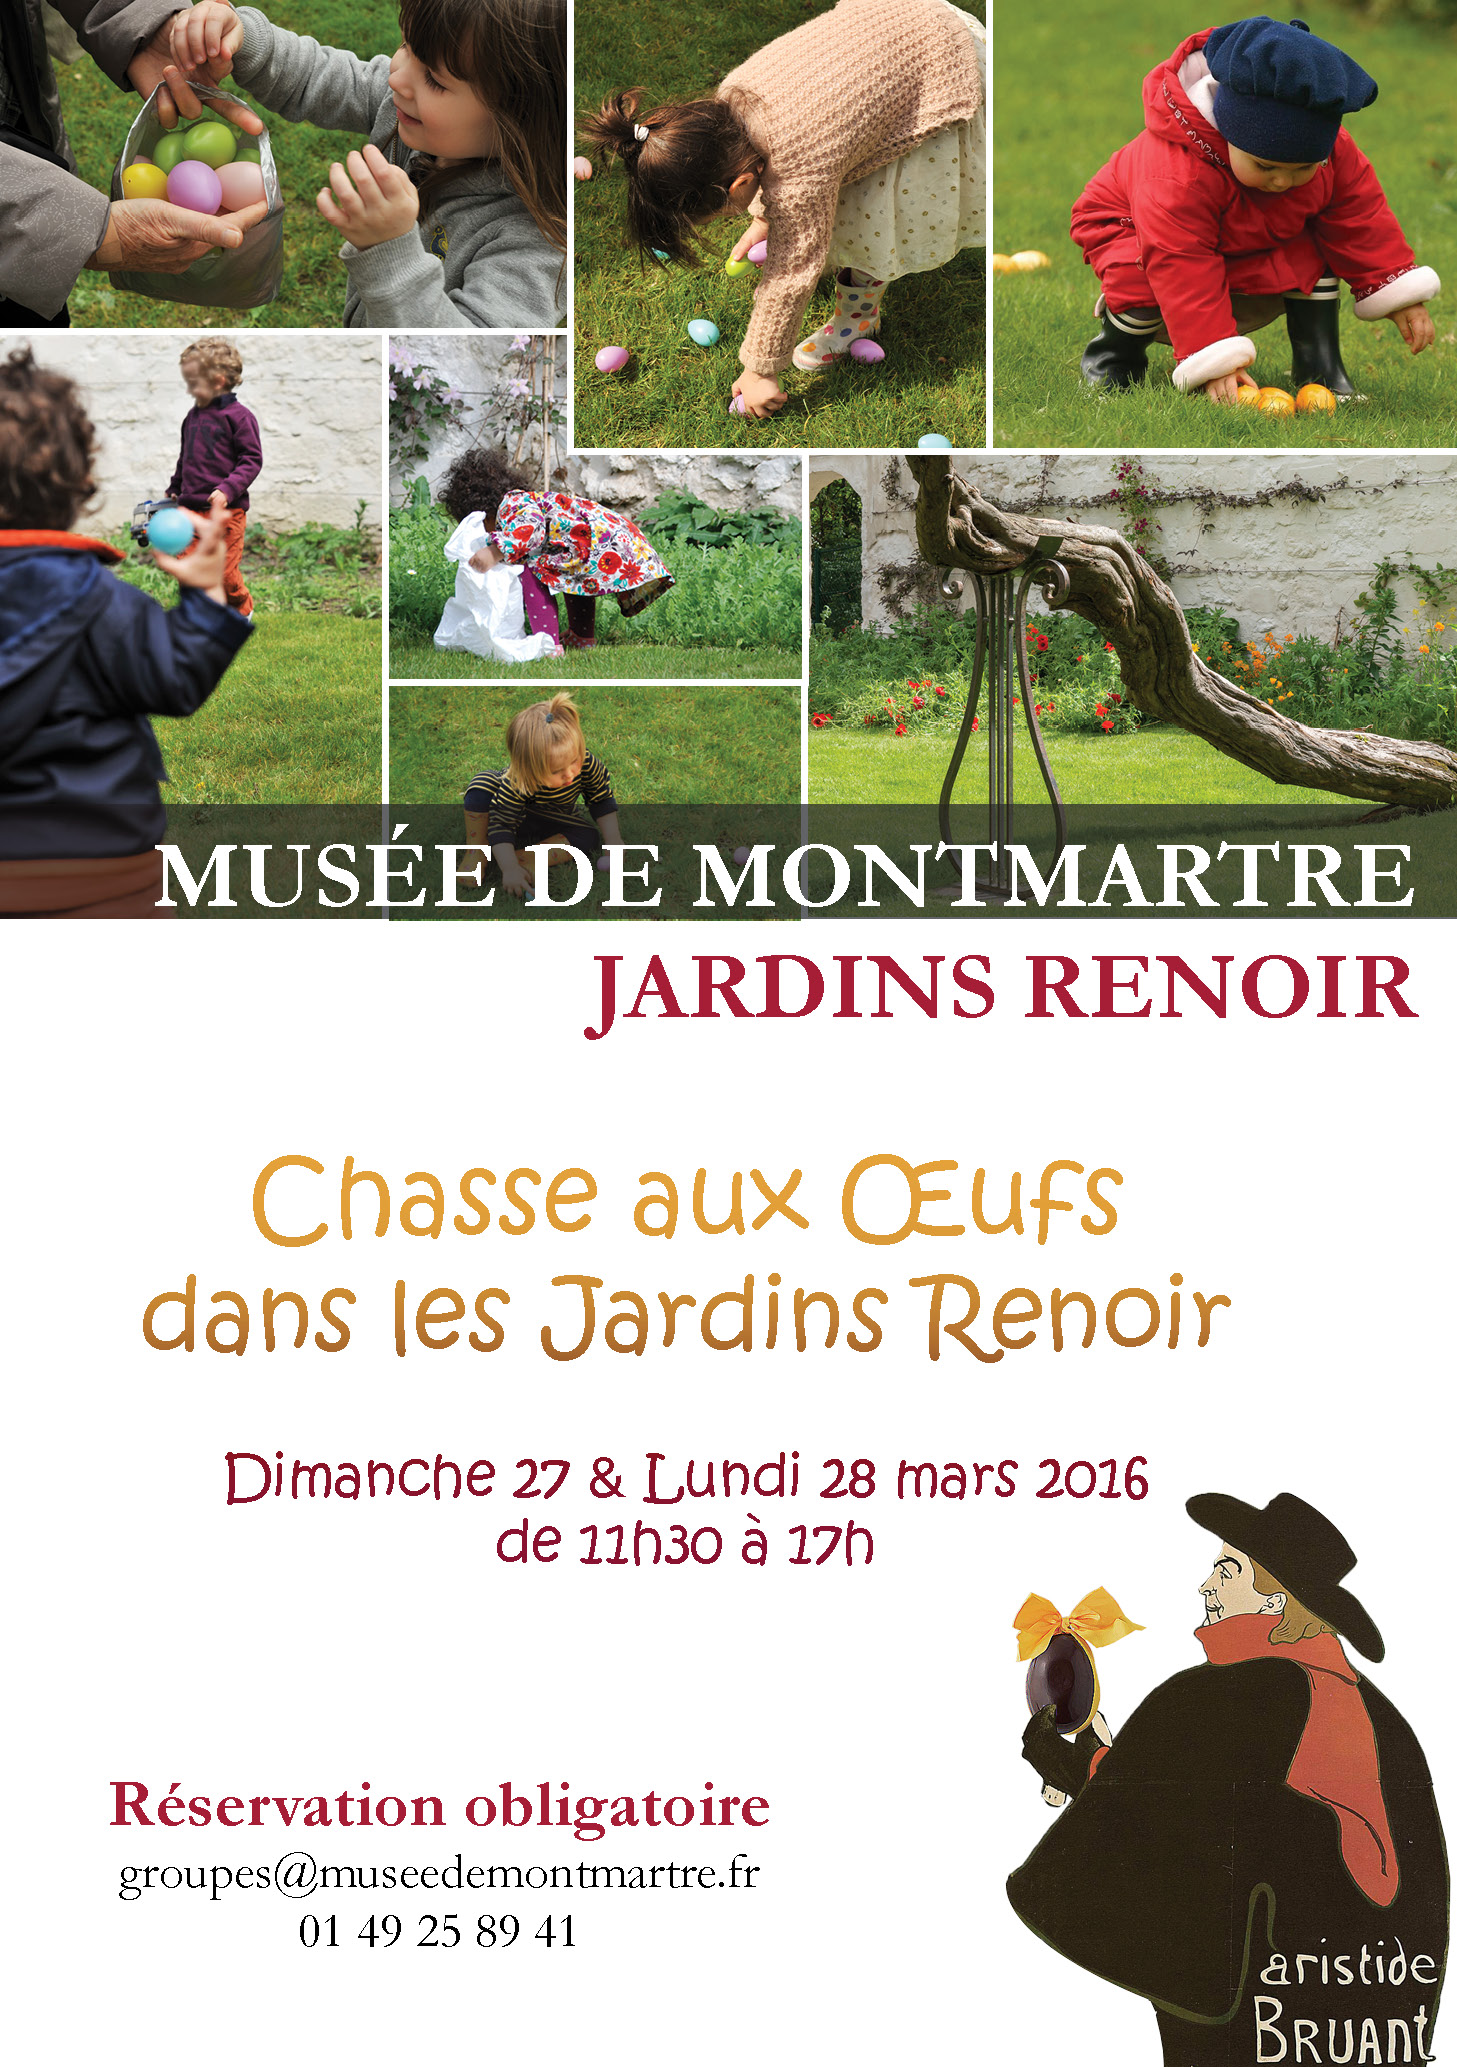 chasse-aux-oeufs-2016